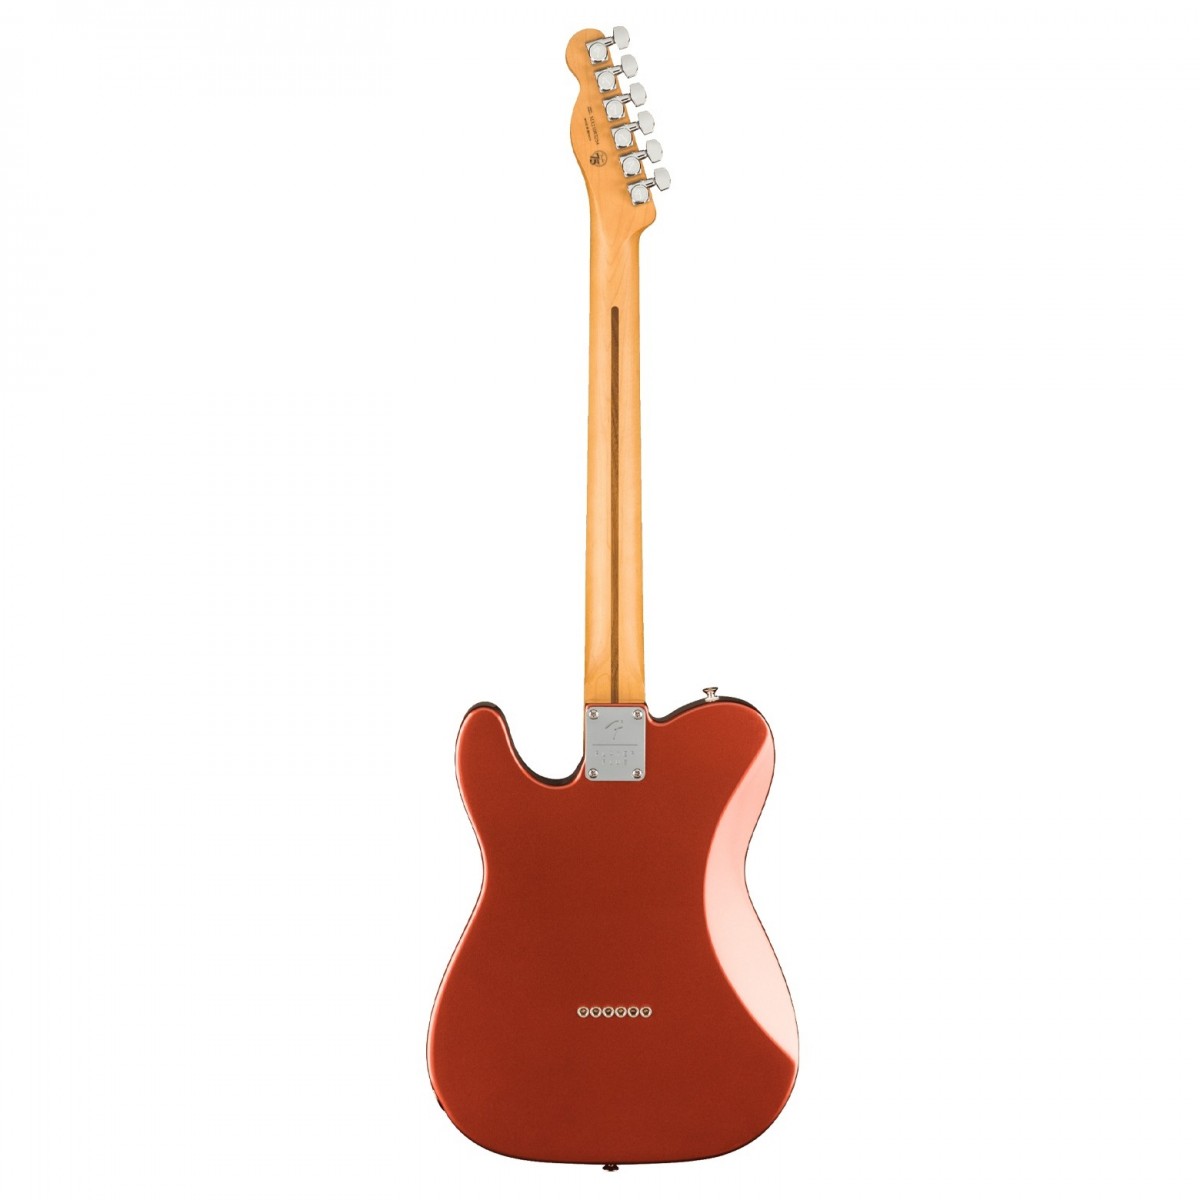 FENDER PLAYER PLUS NASHVILLE TELECASTER PF AGED CANDY APPLE RED CHITARRA ELETTRICA 22 TASTI CANDY APPLE RED 1